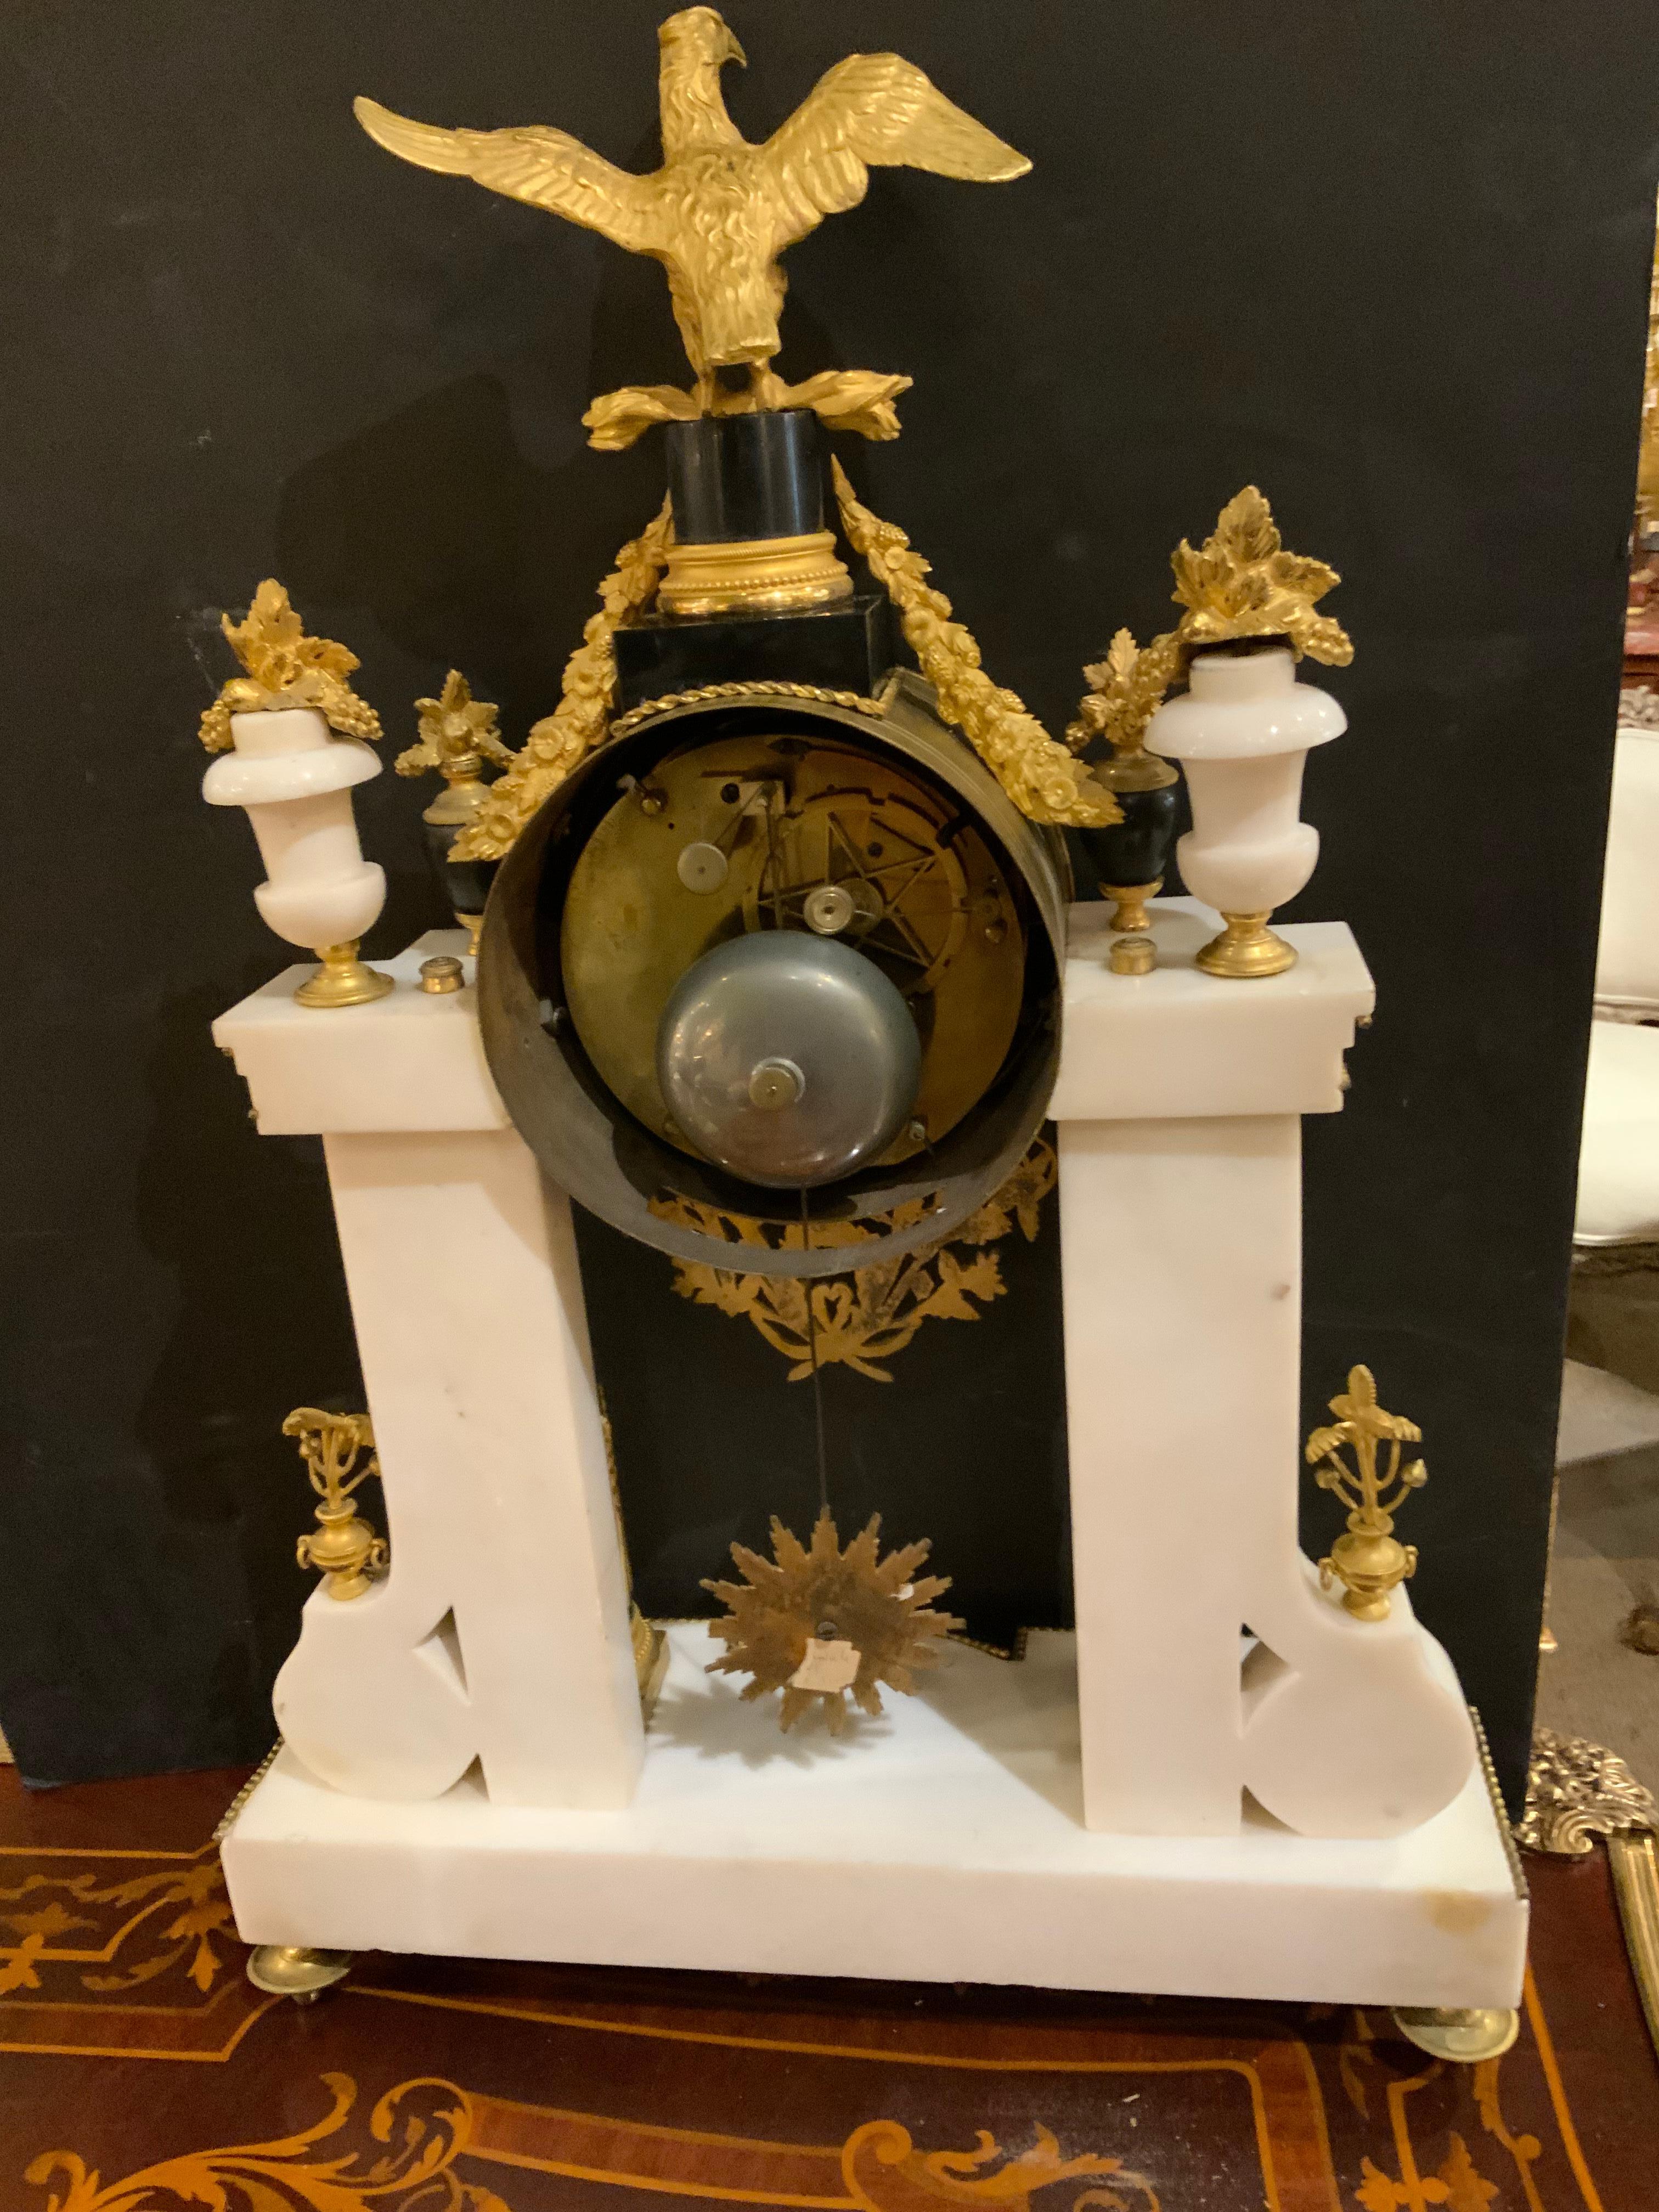 19th Century French Louis XVI-Style White Carrara Marble Portico Clock, Early 19th C.